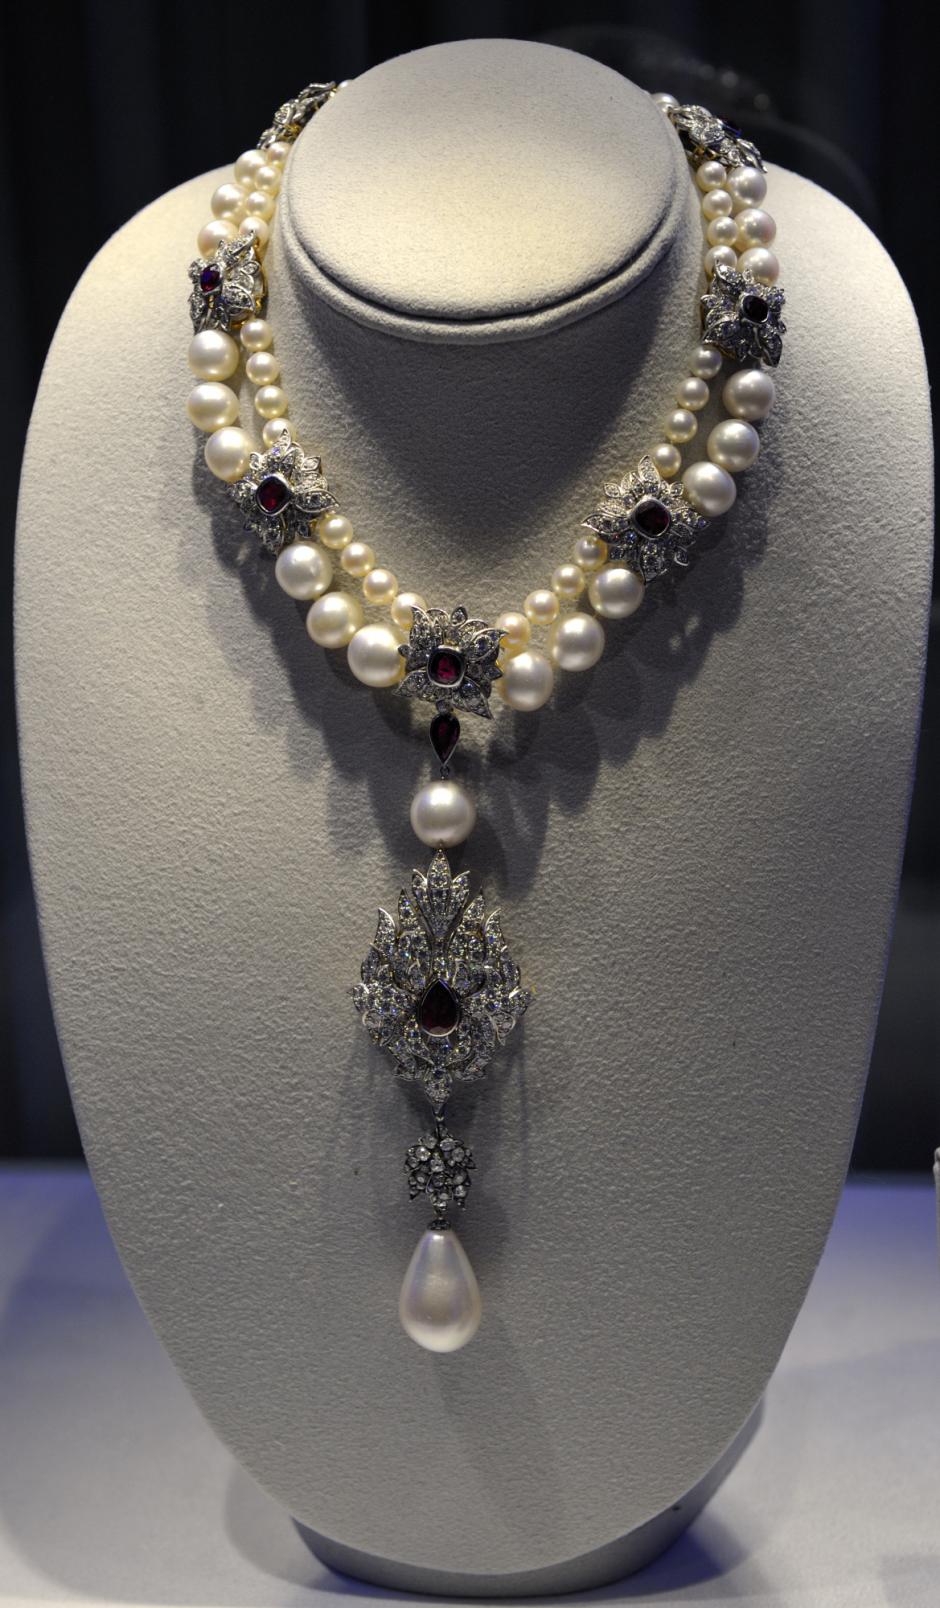 La Peregrina, a pearl, diamond, ruby and cultured pearl necklace by Cartier, given to Elizabeth Taylor by her fifth husband Richard Burton is displayed at the Christie's auction house in Paris November 15, 2011. The necklace is part of The Collection of Elizabeth Taylor featuring her jewellery, haute couture, fashion, and fine arts which will be auctioned in New York in December. REUTERS/Philippe Wojazer  (FRANCE - Tags: ENTERTAINMENT) - PM1E7BF0SBU01